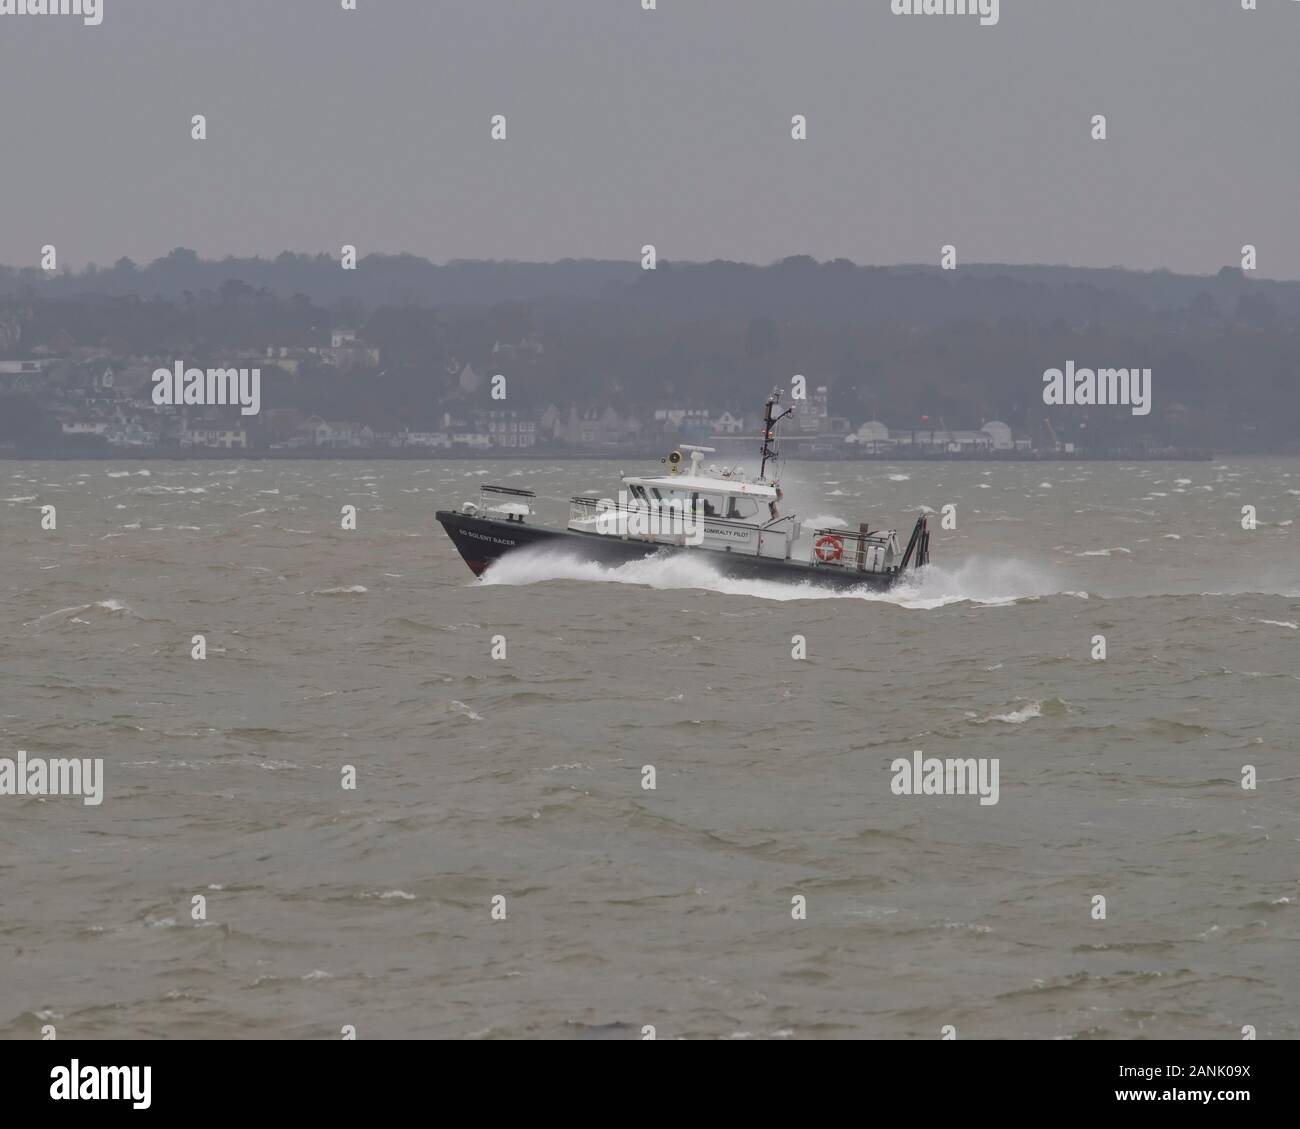 Admiralty Pilot Launch 'SD Solent Racer' battles through rough water in Spithead Stock Photo